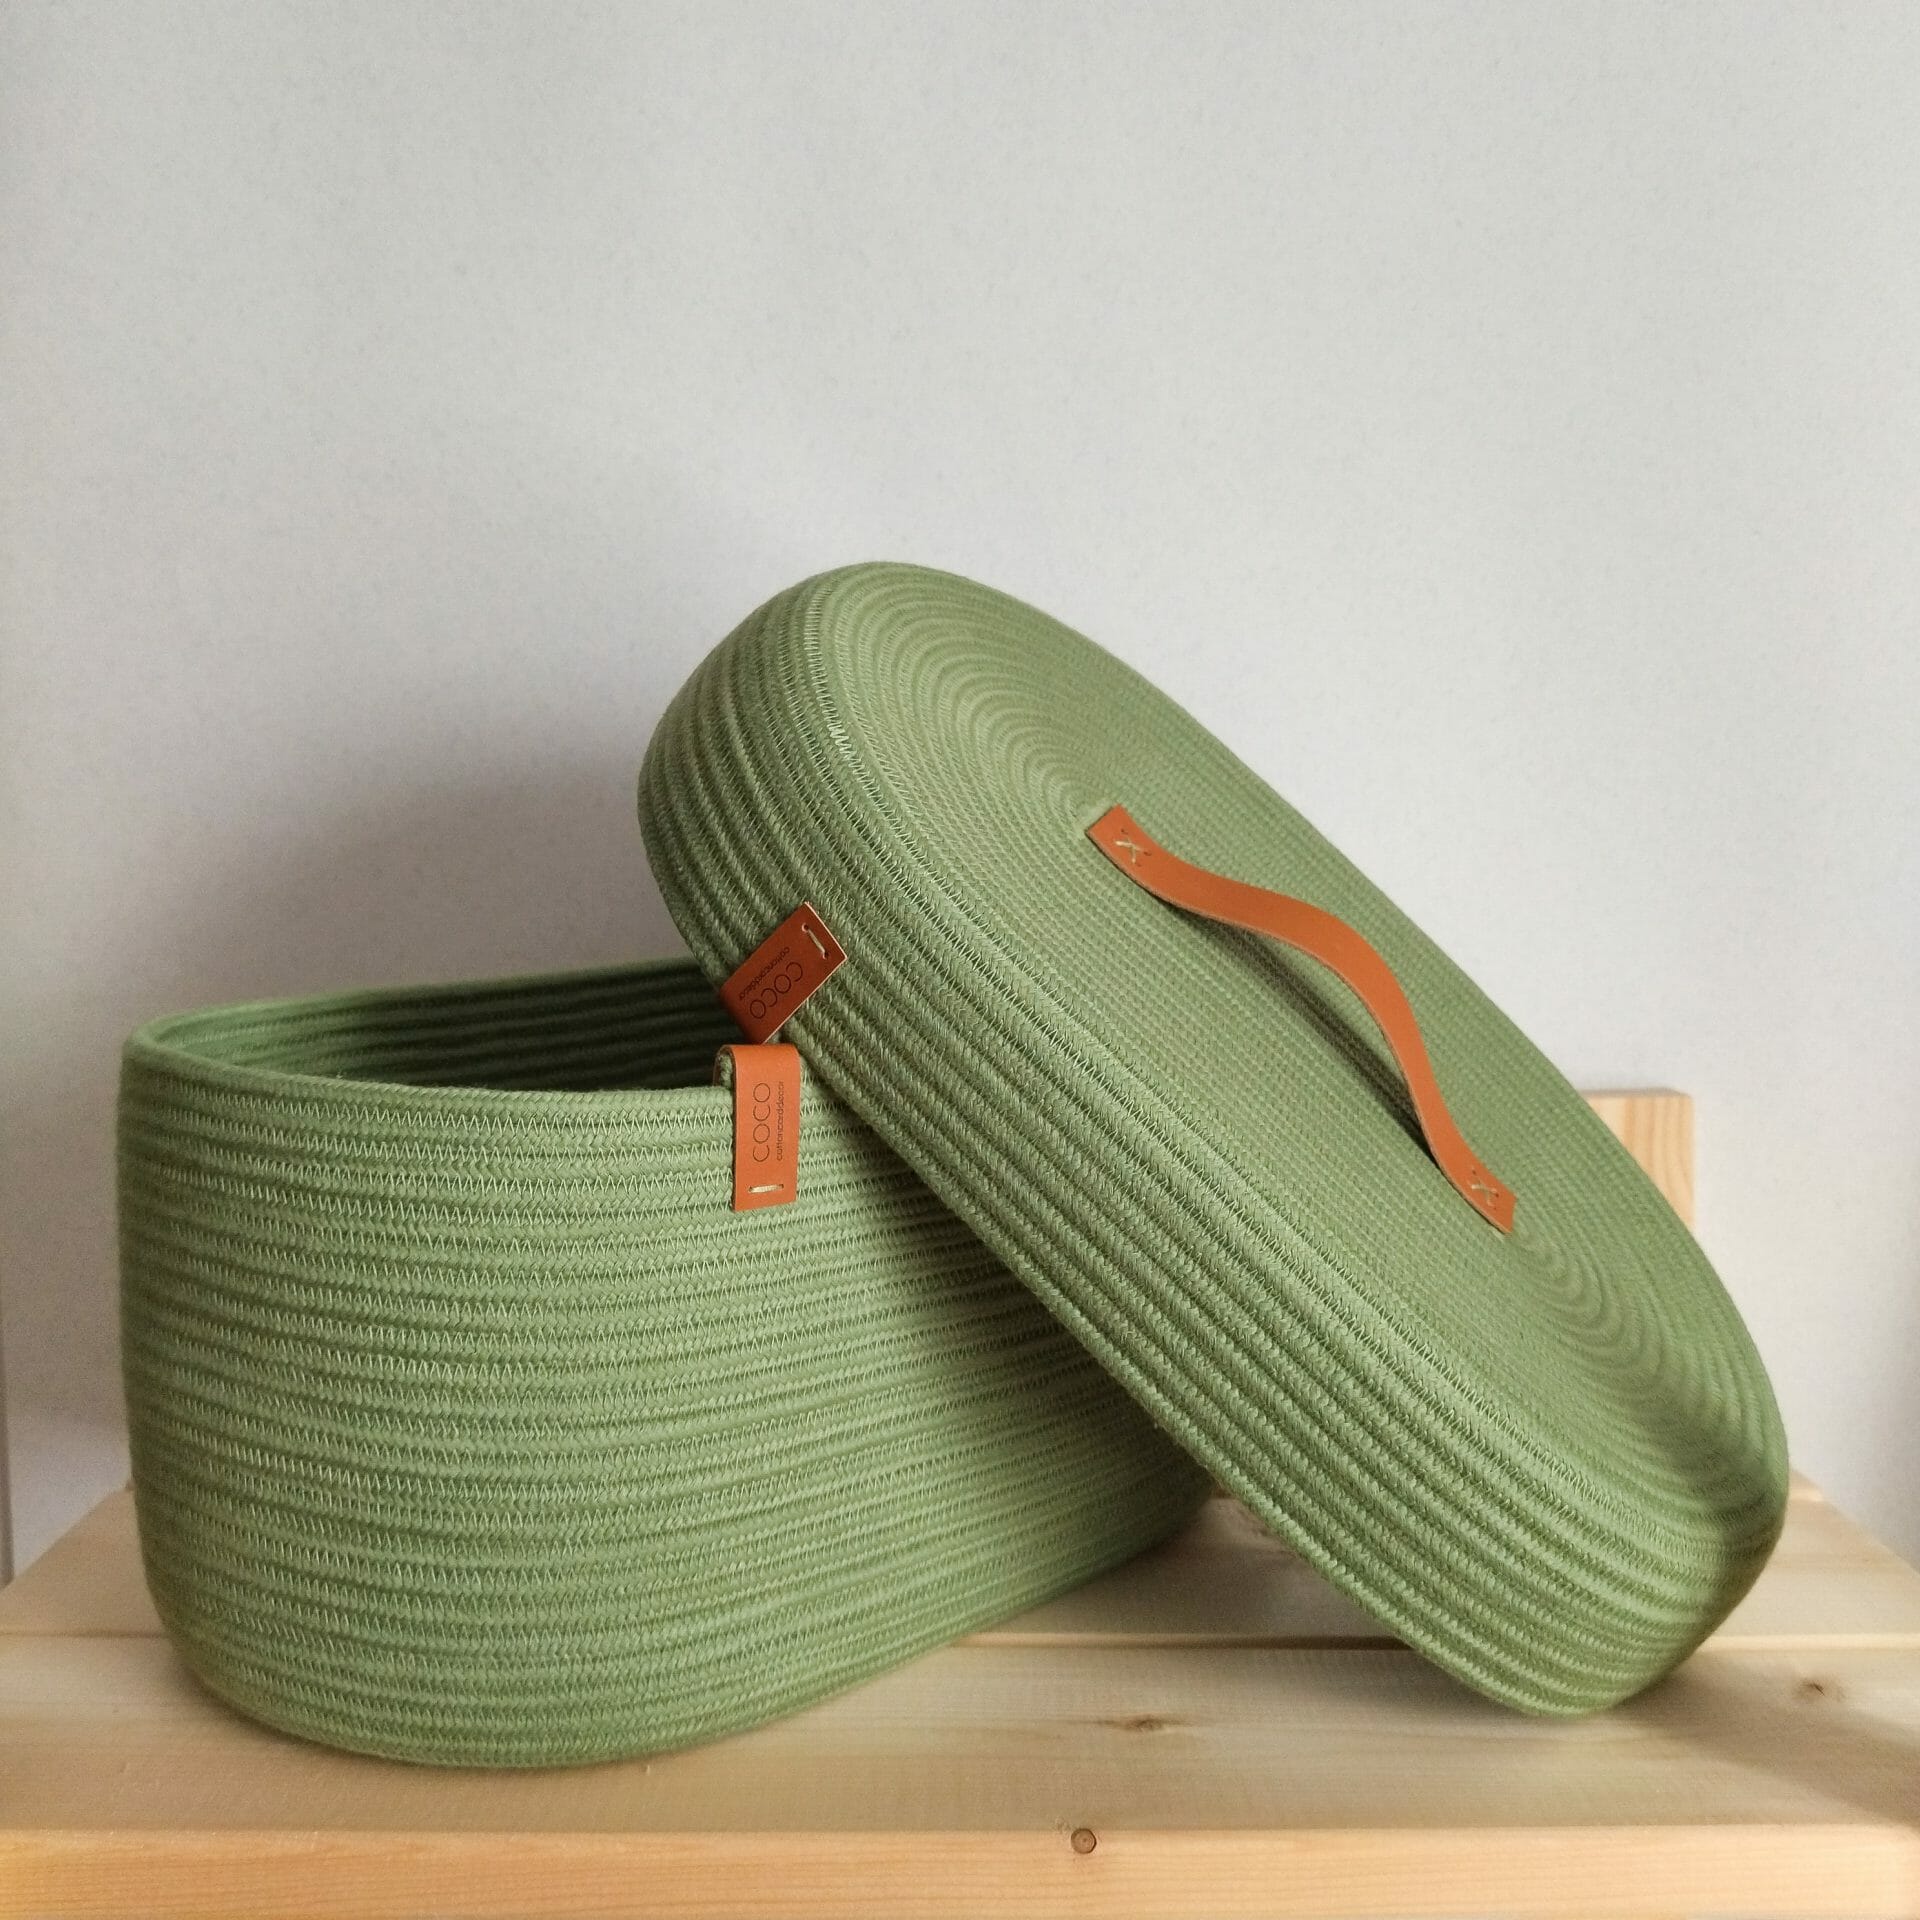 oval green rope basket with lid opened